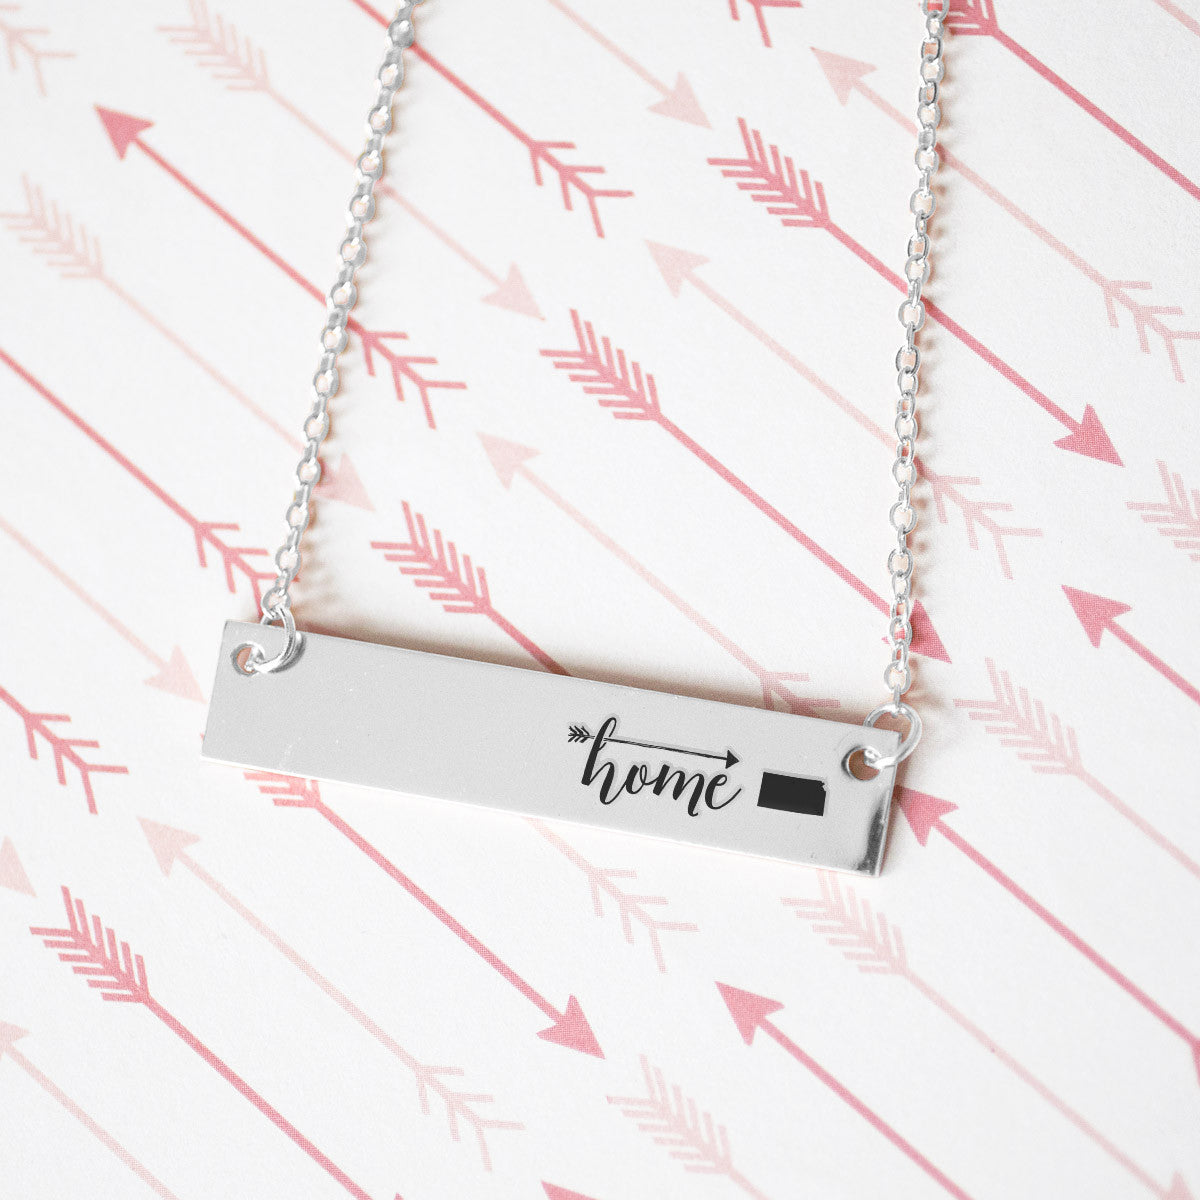 Home is Kansas Gold / Silver Bar Necklace - pipercleo.com